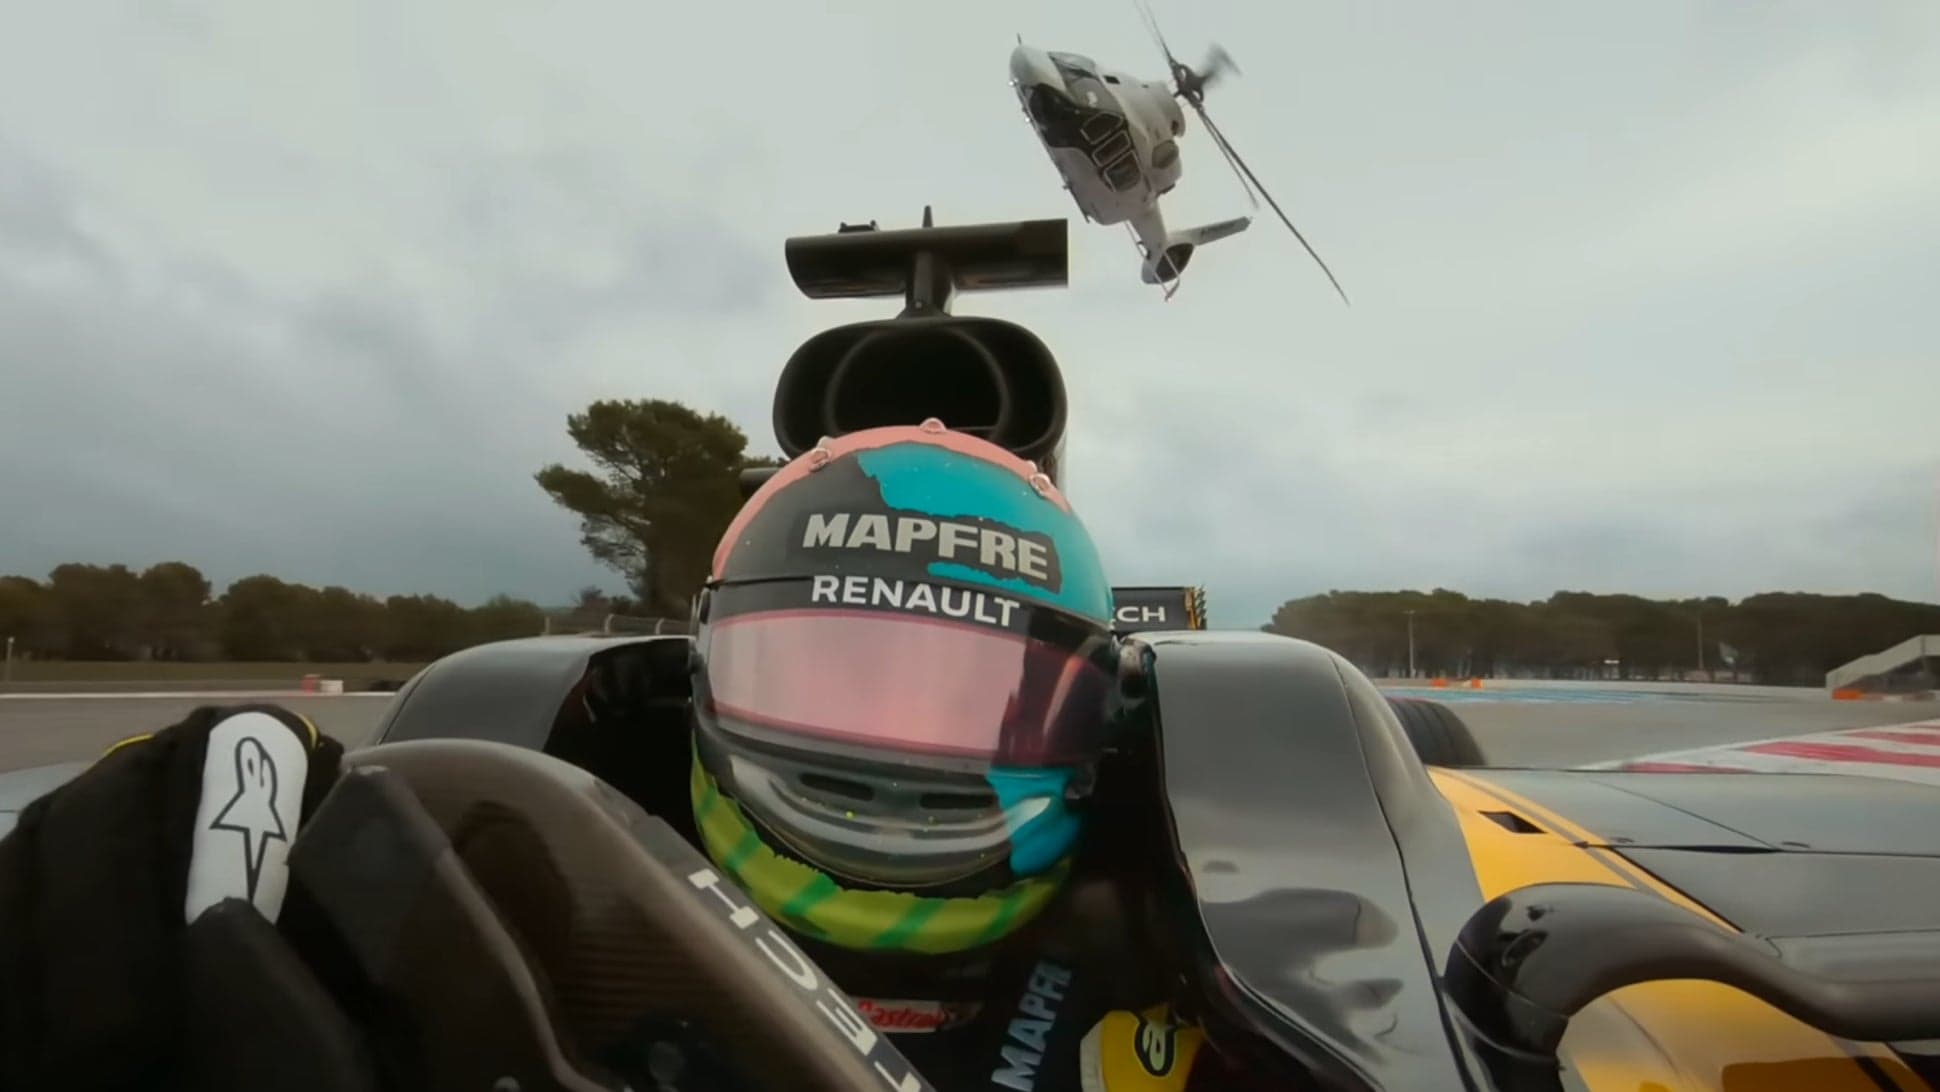 The Coolest Track Battle In Ages Is an Airbus ACH160 Helicopter Chasing a Renault F1 Car